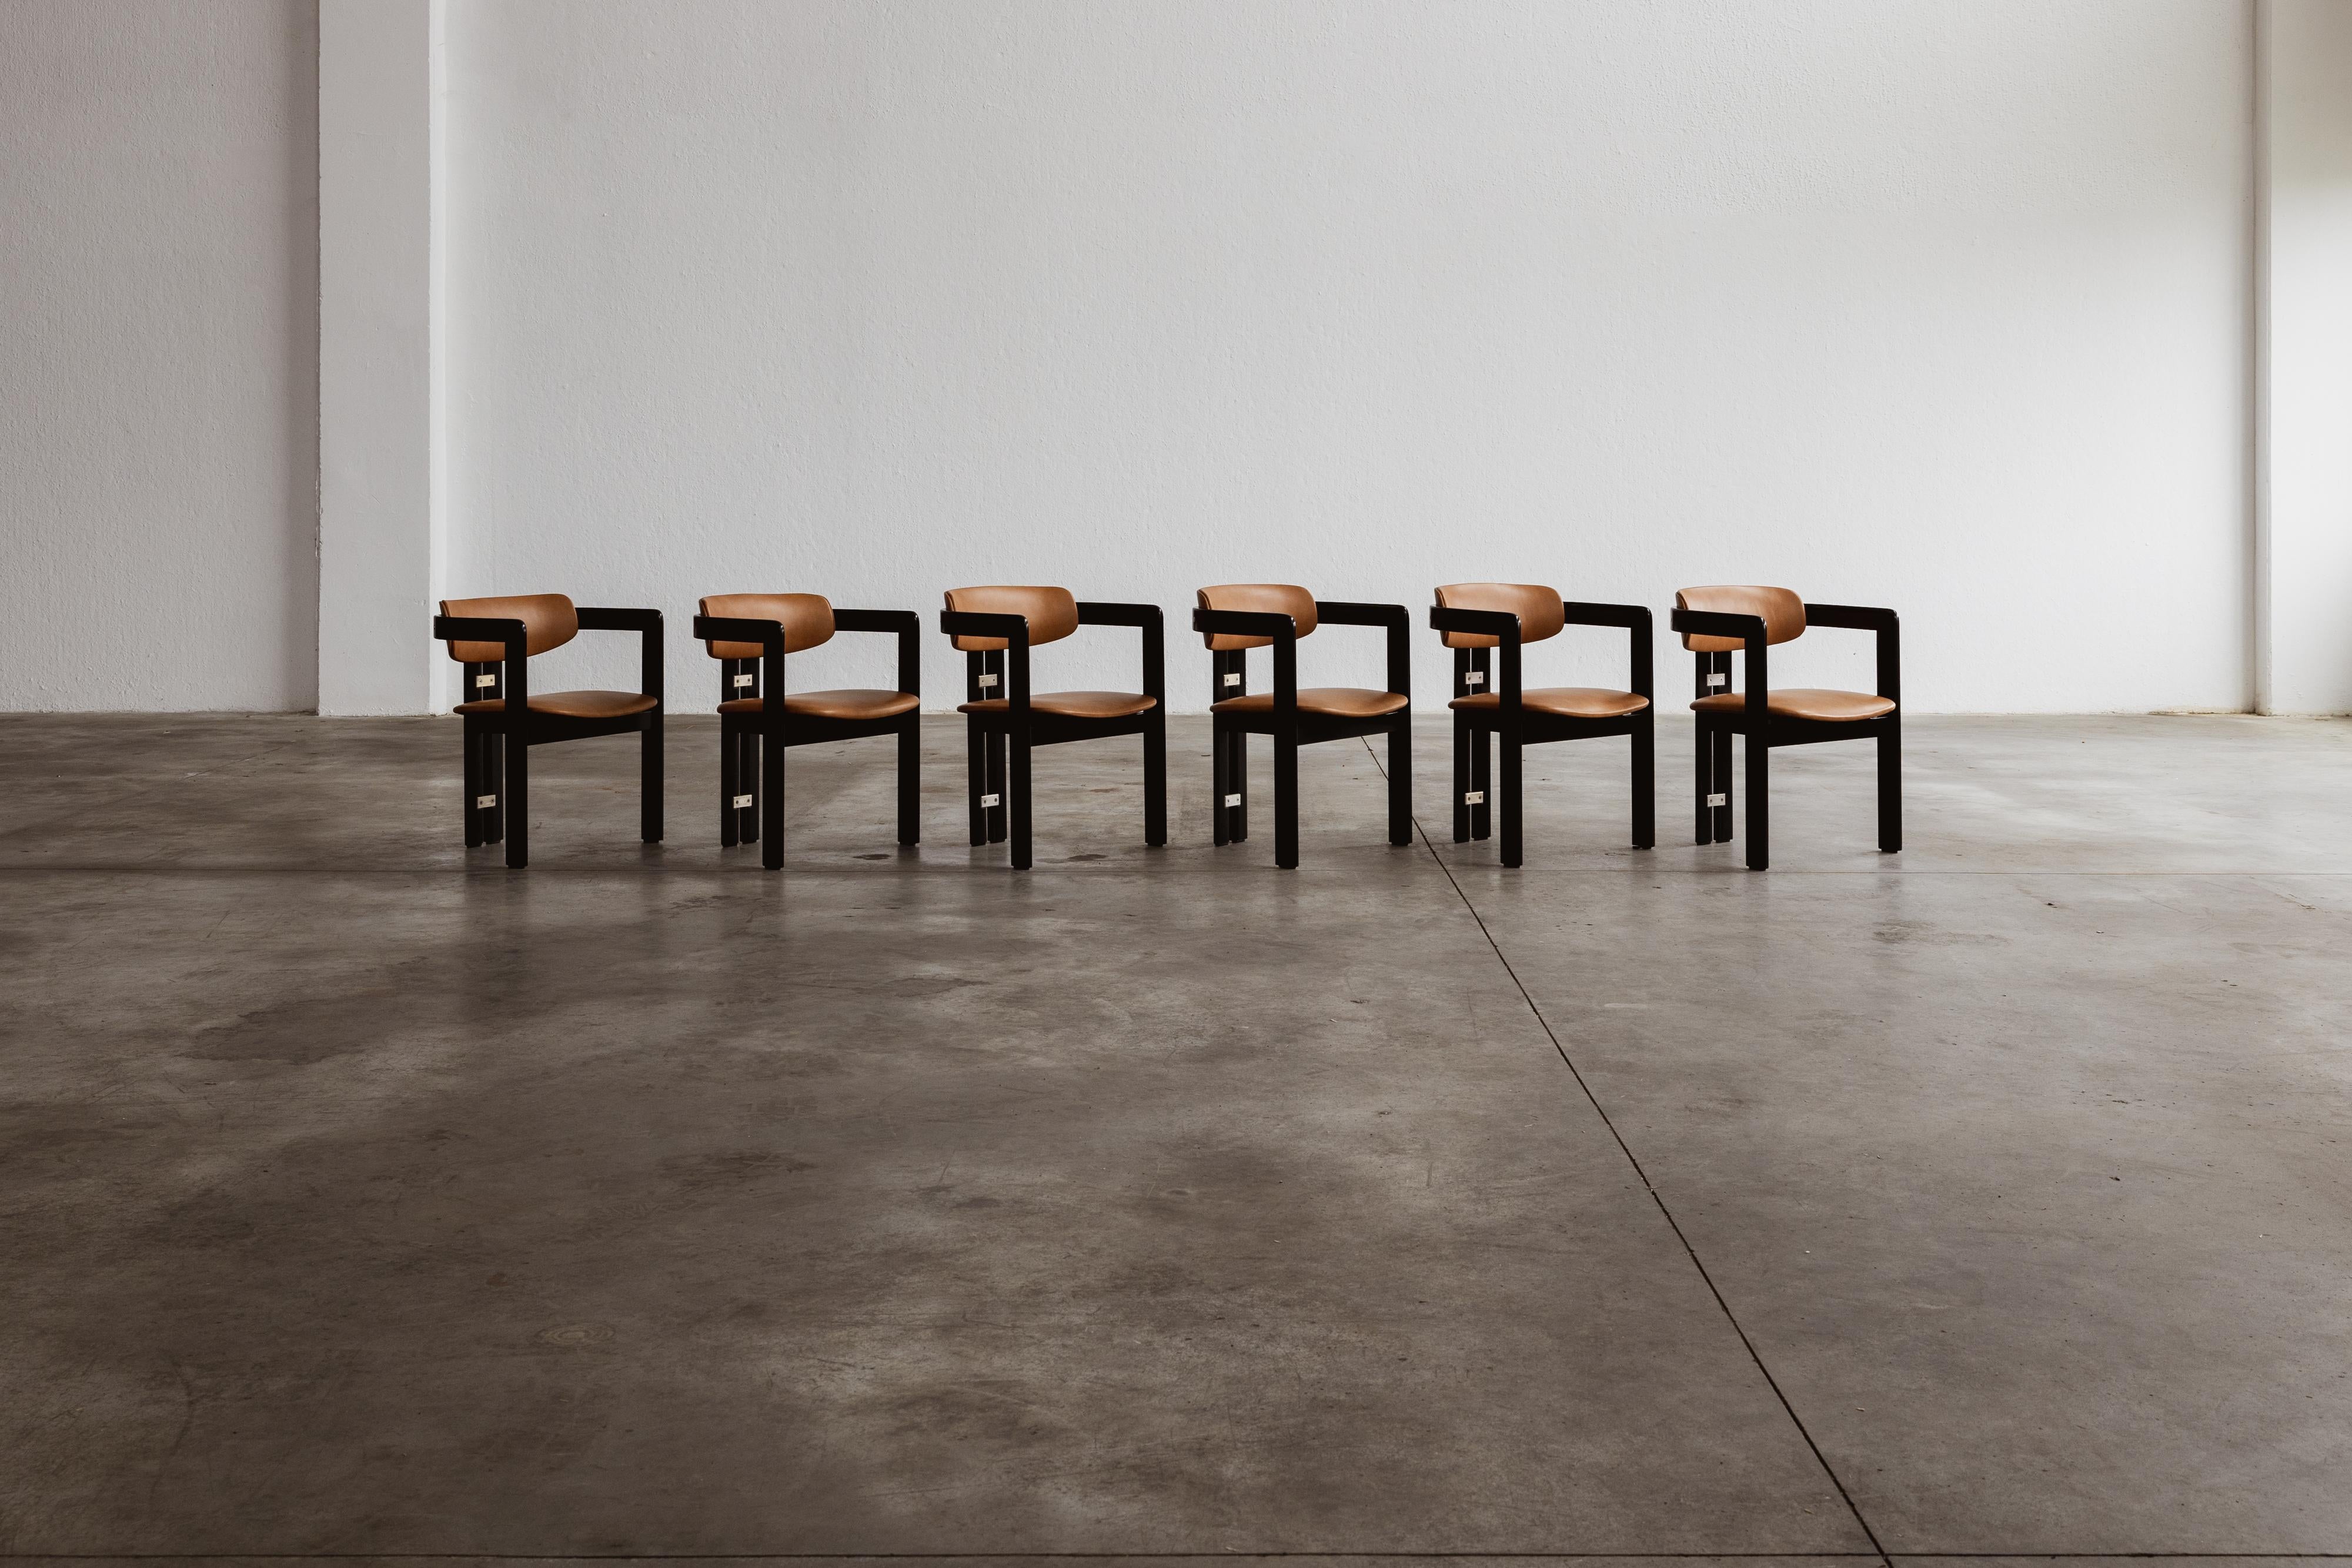 Augusto Savini “Pamplona” dining chairs for Pozzi, black framework and ranch leather, Italy, 1965, set of six.

In the realm of Italian craftsmanship, the Pamplona chairs by Augusto Savini for Pozzi stand as a symbol of architectural elegance.